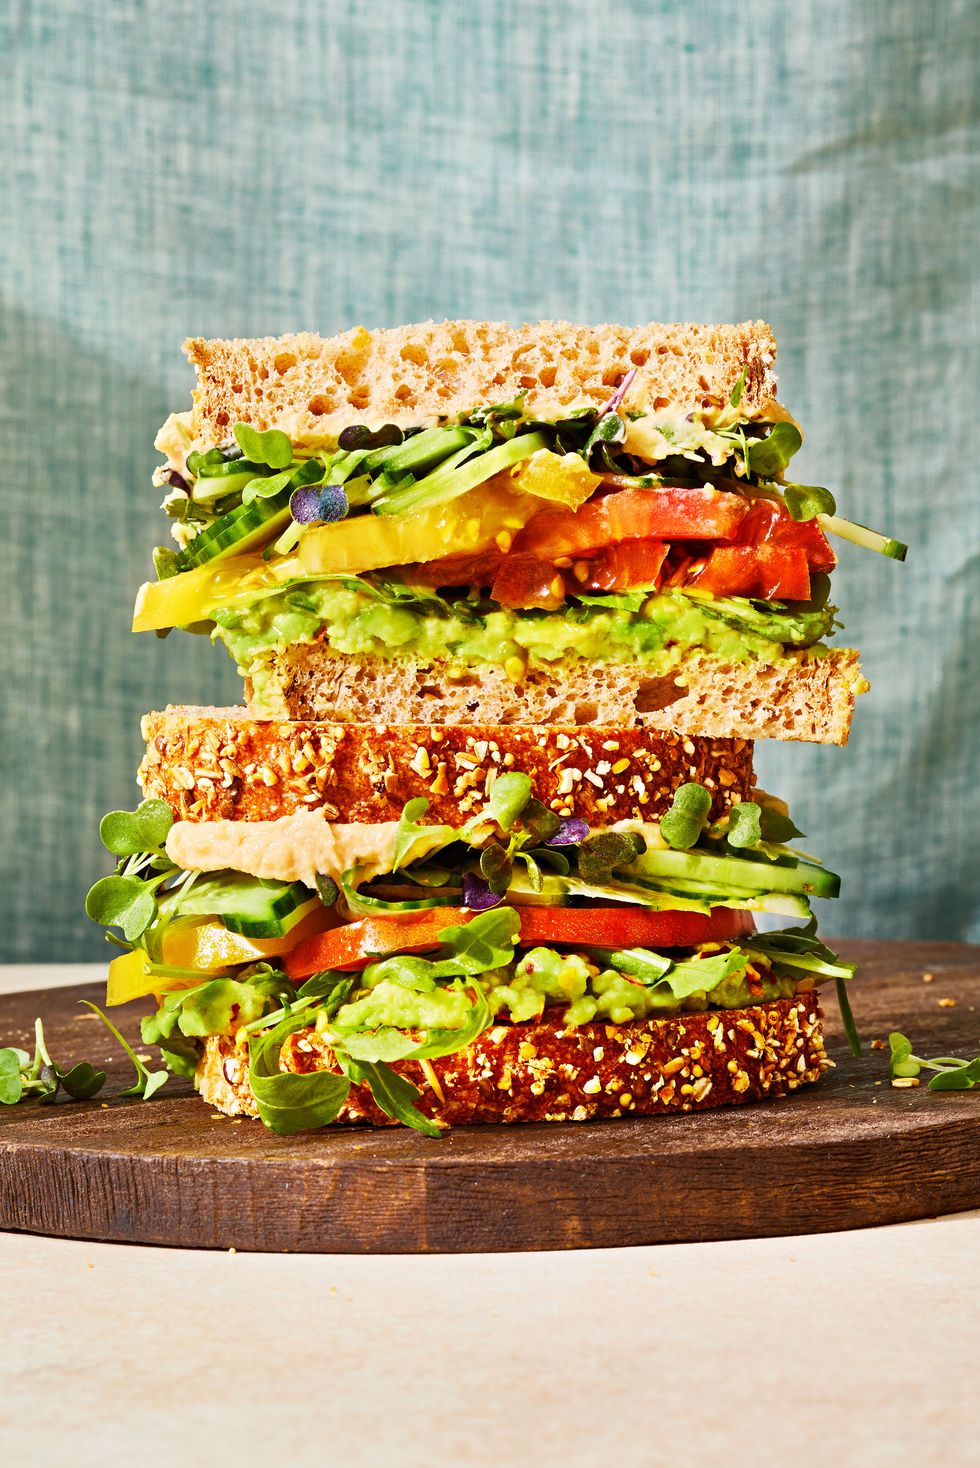 vegetable sandwich with avocado, tomato, cucumber and greens